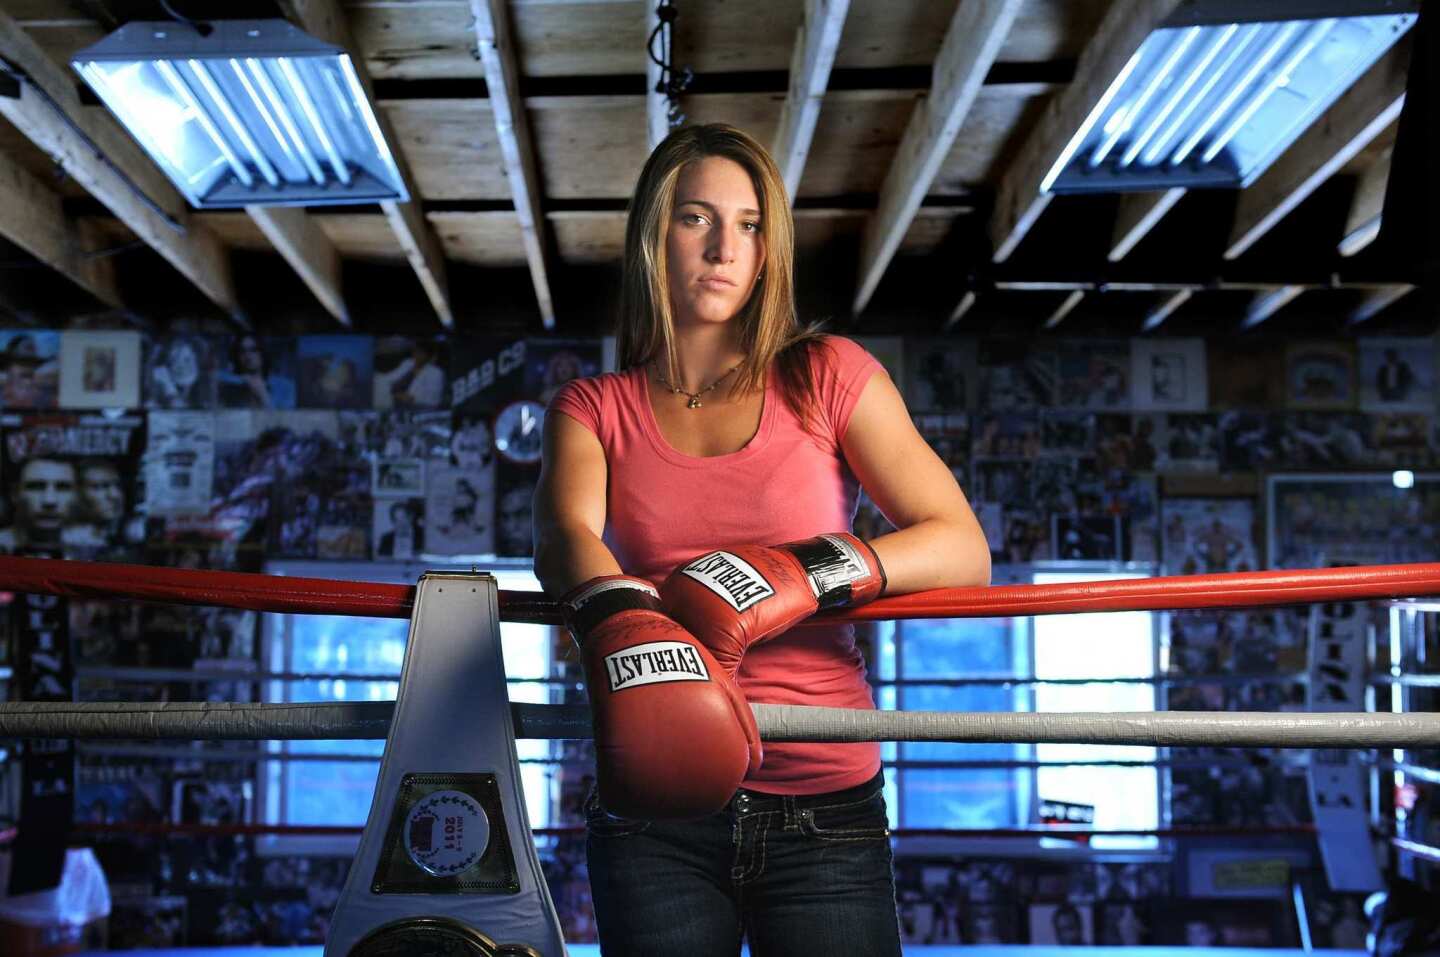 Mayer is riding a wave of success heading into the Olympic trials in February. She recently beat former European Union champion Sandra Kruk and World Championship medalist Karolina Graczyk, both of Poland, and former world kick-boxing champion Julia Irmen of Germany on successive days in last month's International Dual Series in Oxnard.